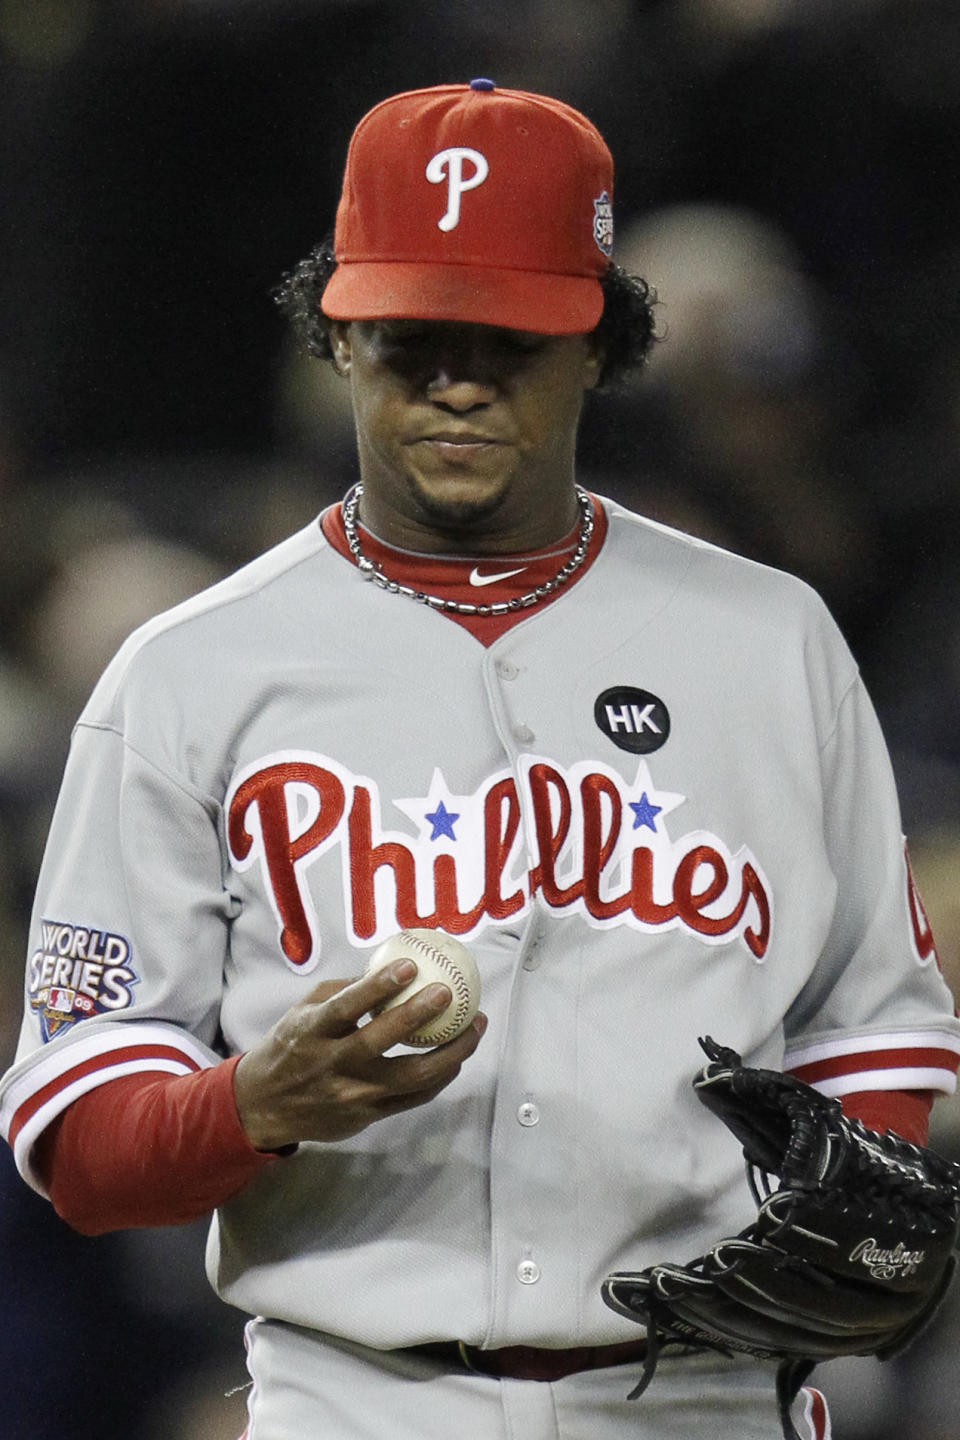 FILE - In this Nov. 4, 2009, file photo, Philadelphia Phillies' Pedro Martinez looks at his ball after giving up a two-run home run to New York Yankees' Hideki Matsui during the second inning of Game 6 of the Major League Baseball World Series in New York. The Phillies lost to the New York Yankees in six games and Martinez went 0-2 in two starts against the Yankees with a 6.30 ERA _ but has long said he was sick in his Game 6 start at Yankee Stadium and always wished he could have that one back. (AP Photo/David J. Phillip, File)